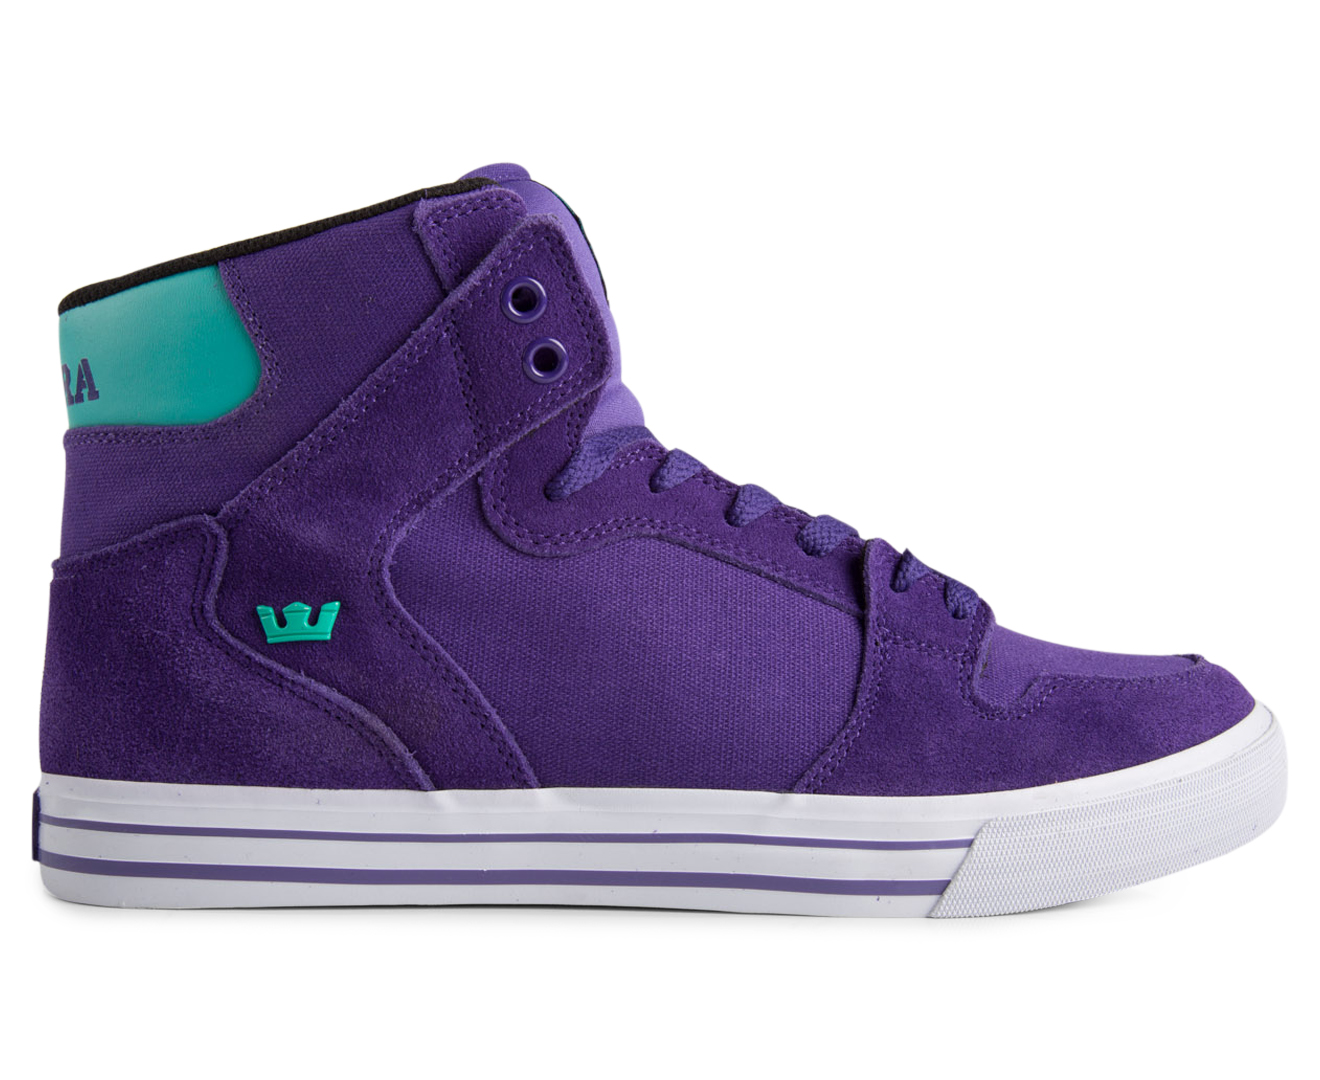 Supra Men's Vaider High Top Shoe - Purple/Teal | Great daily deals at ...